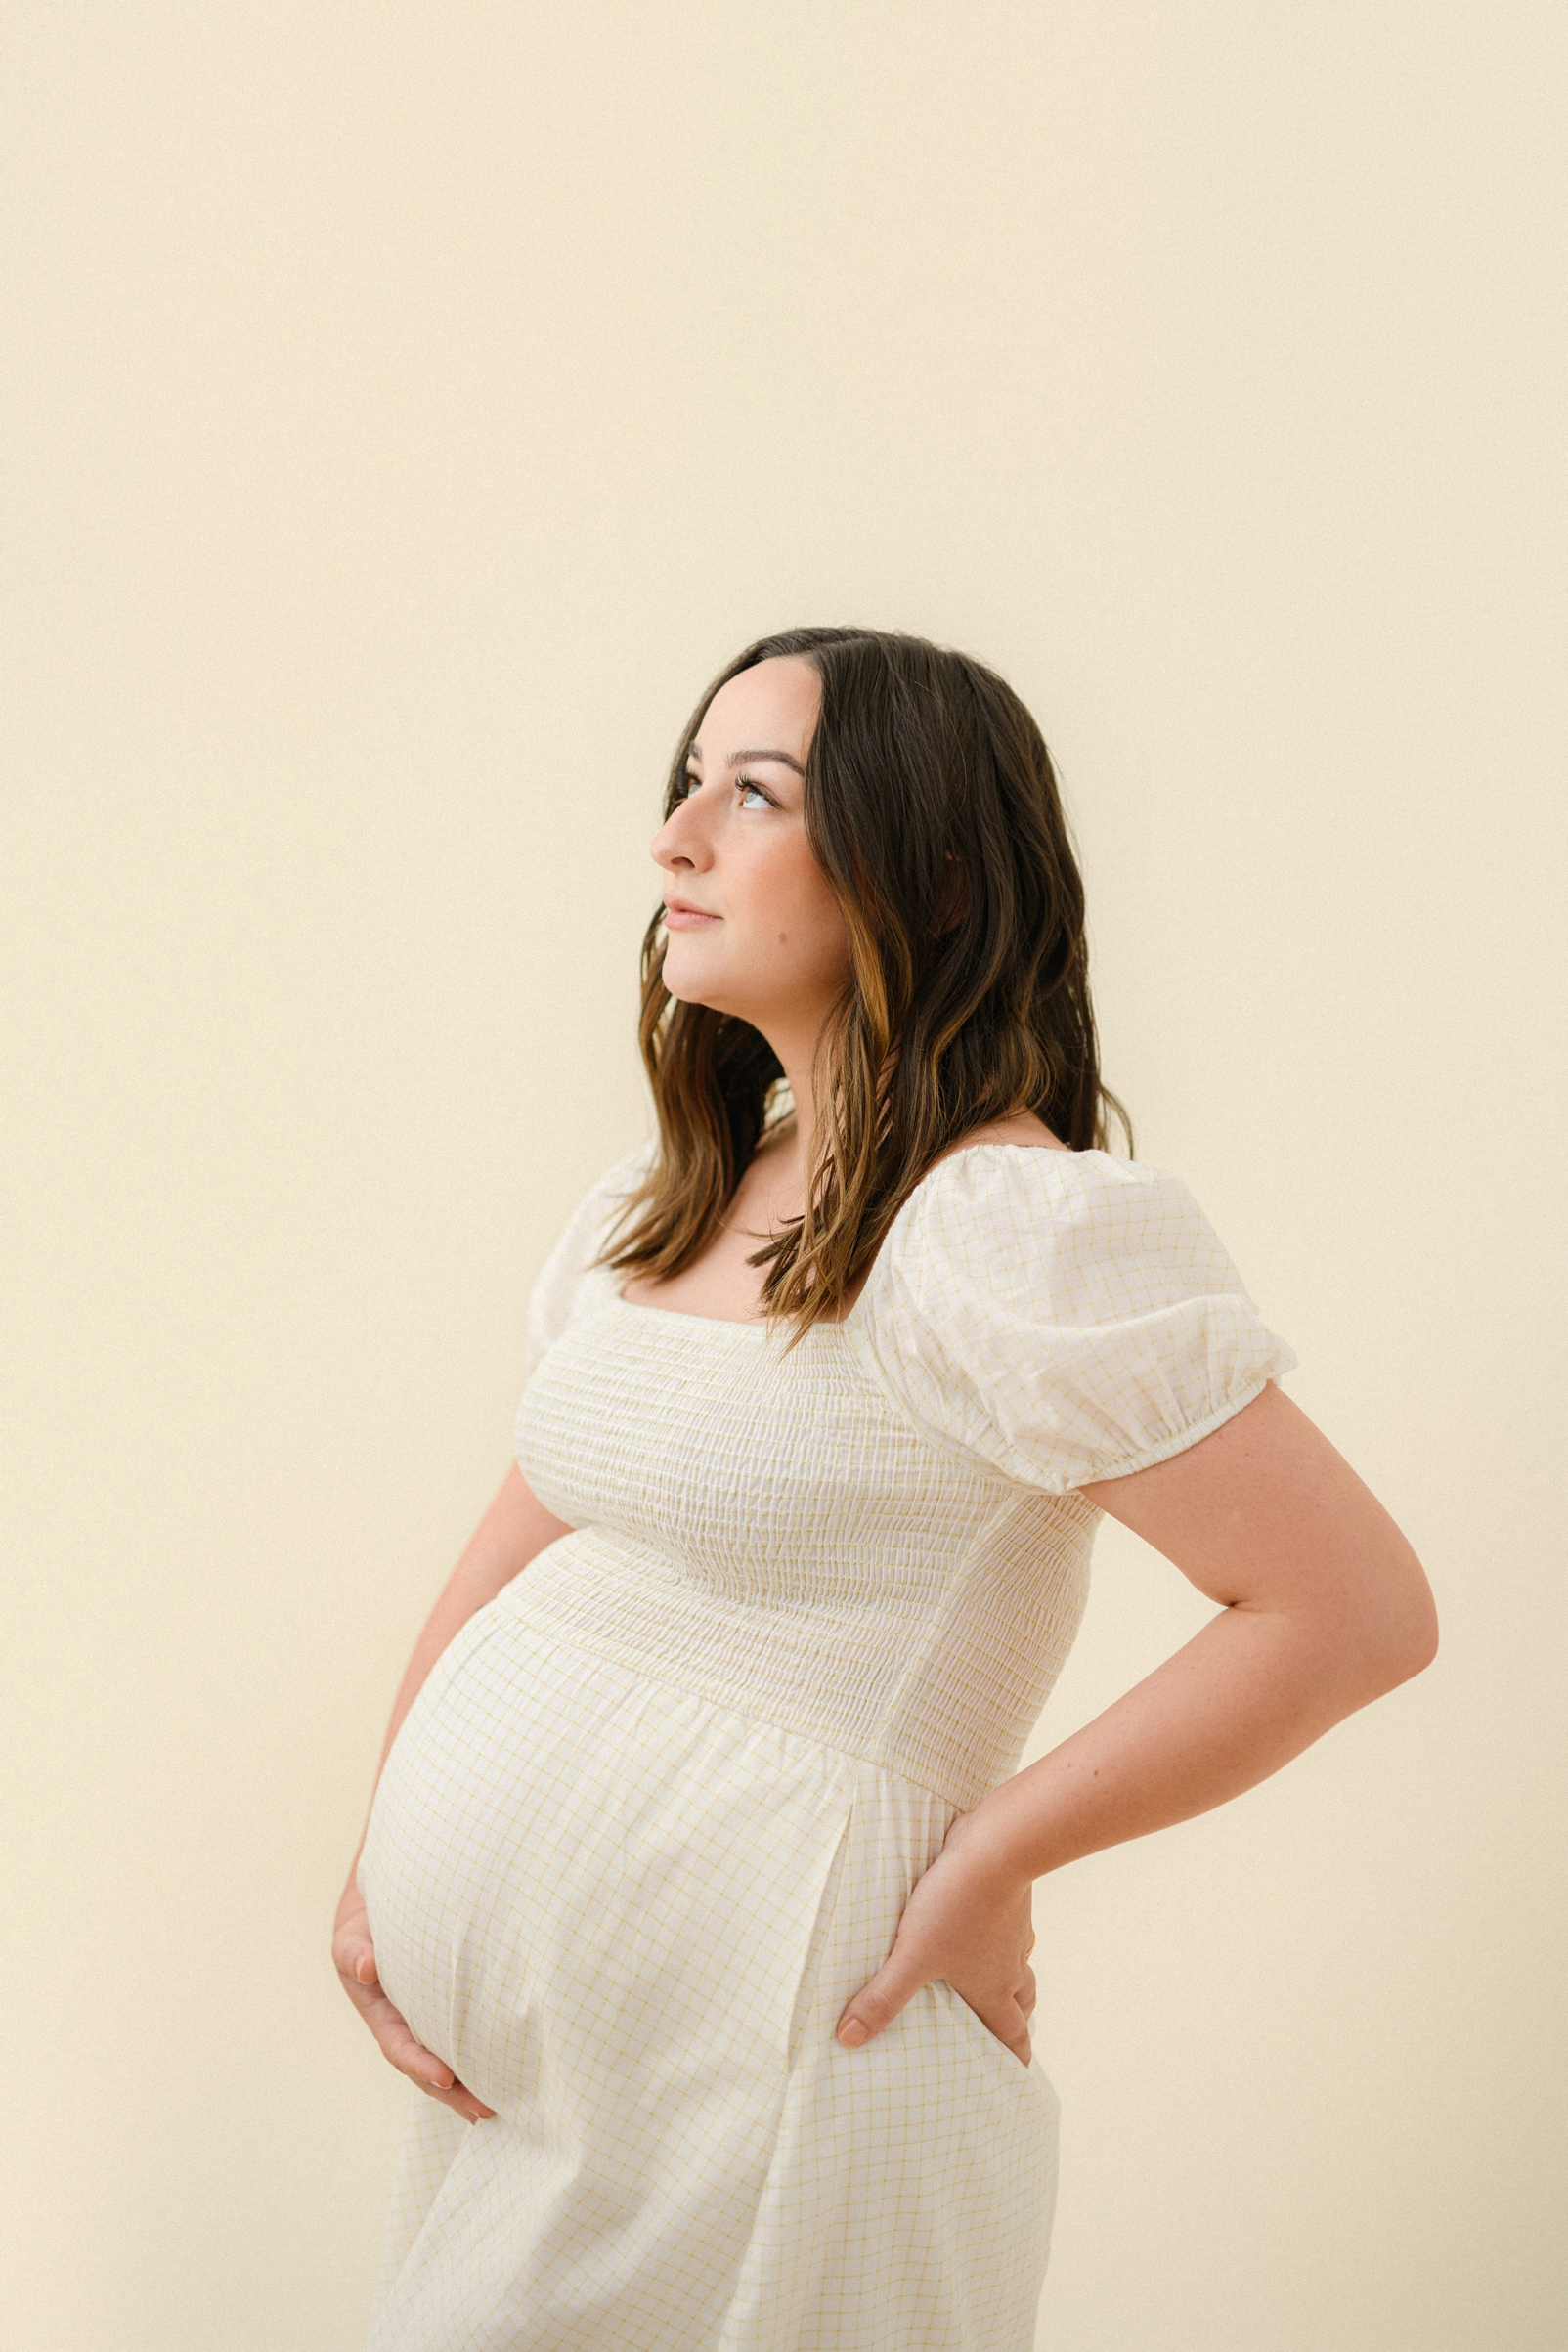 Arcadian Photography is a maternity photographer in Salem, Oregon